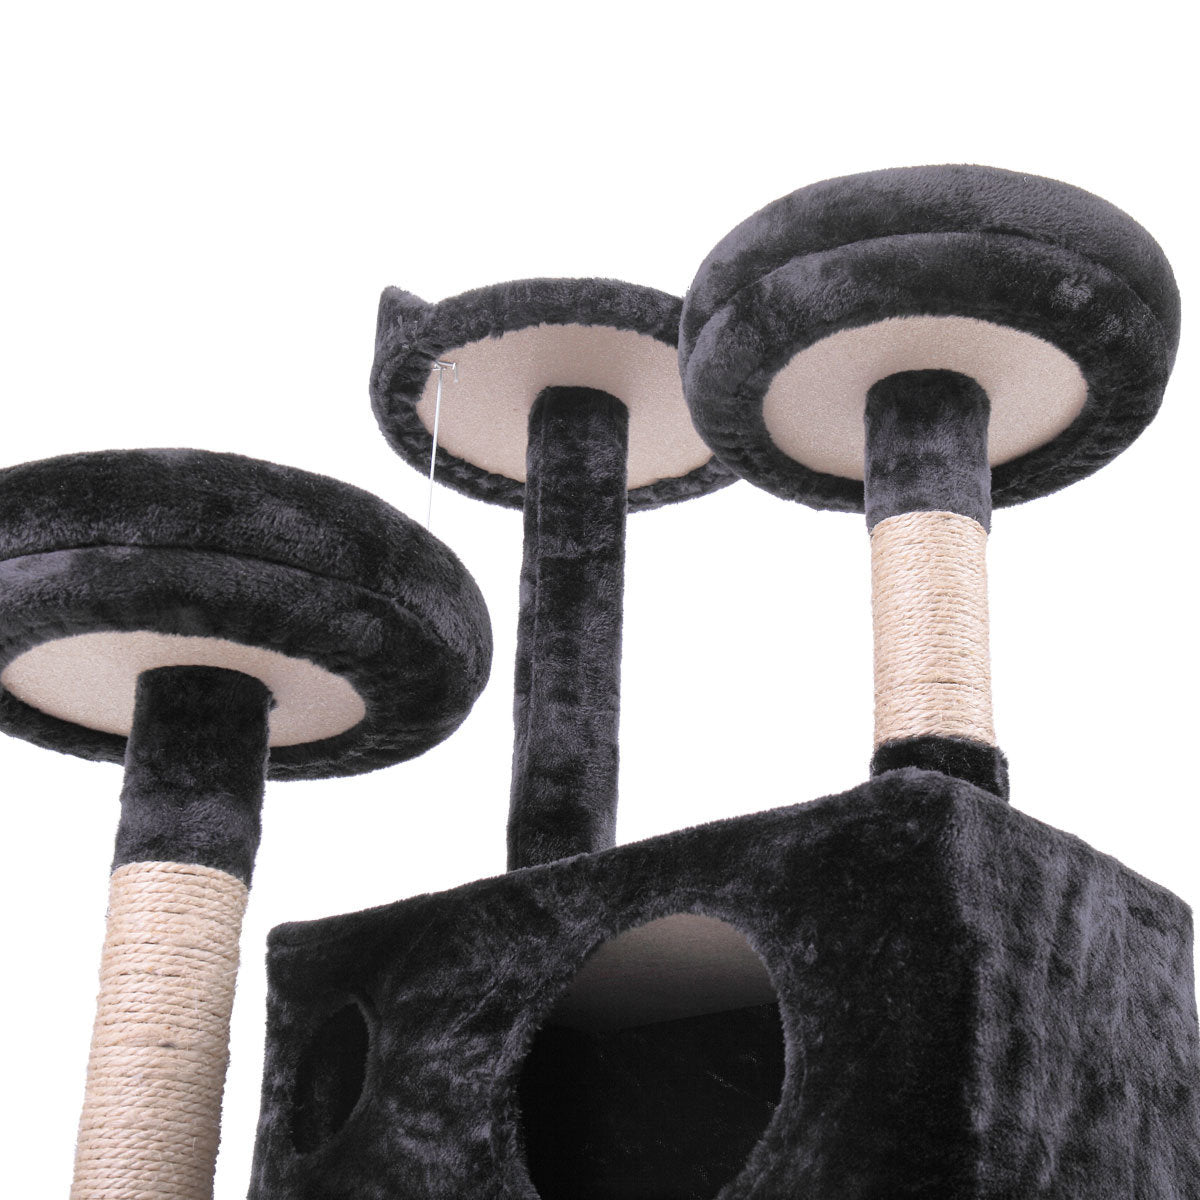 Cat Tree Cat Tower with Scratching Ball, Plush Cushion, Ladder and Condos for Indoor Cats, Gray XH